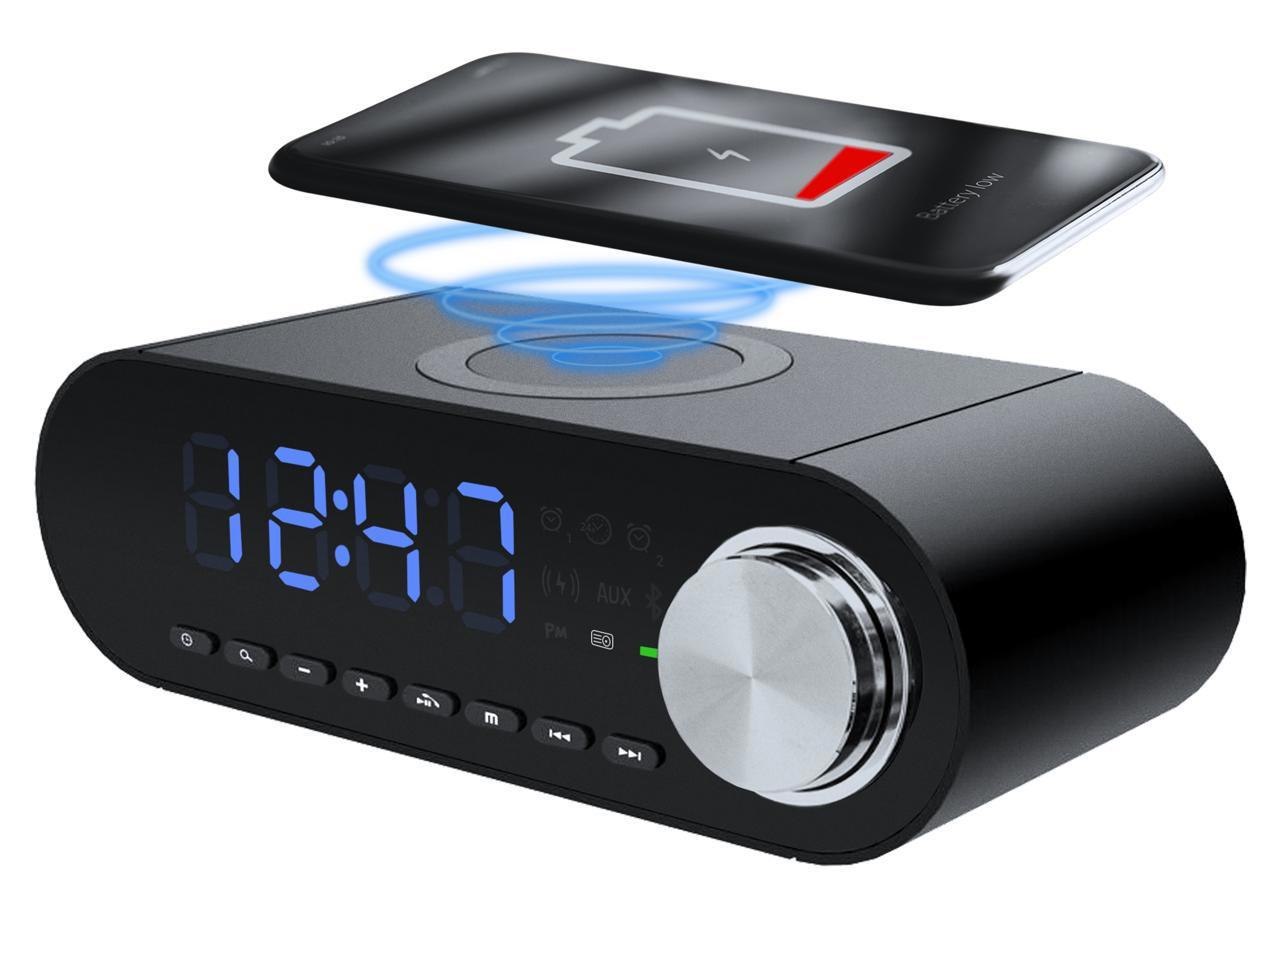 Rosewill Digital Alarm Clock With Wireless Charging Dock